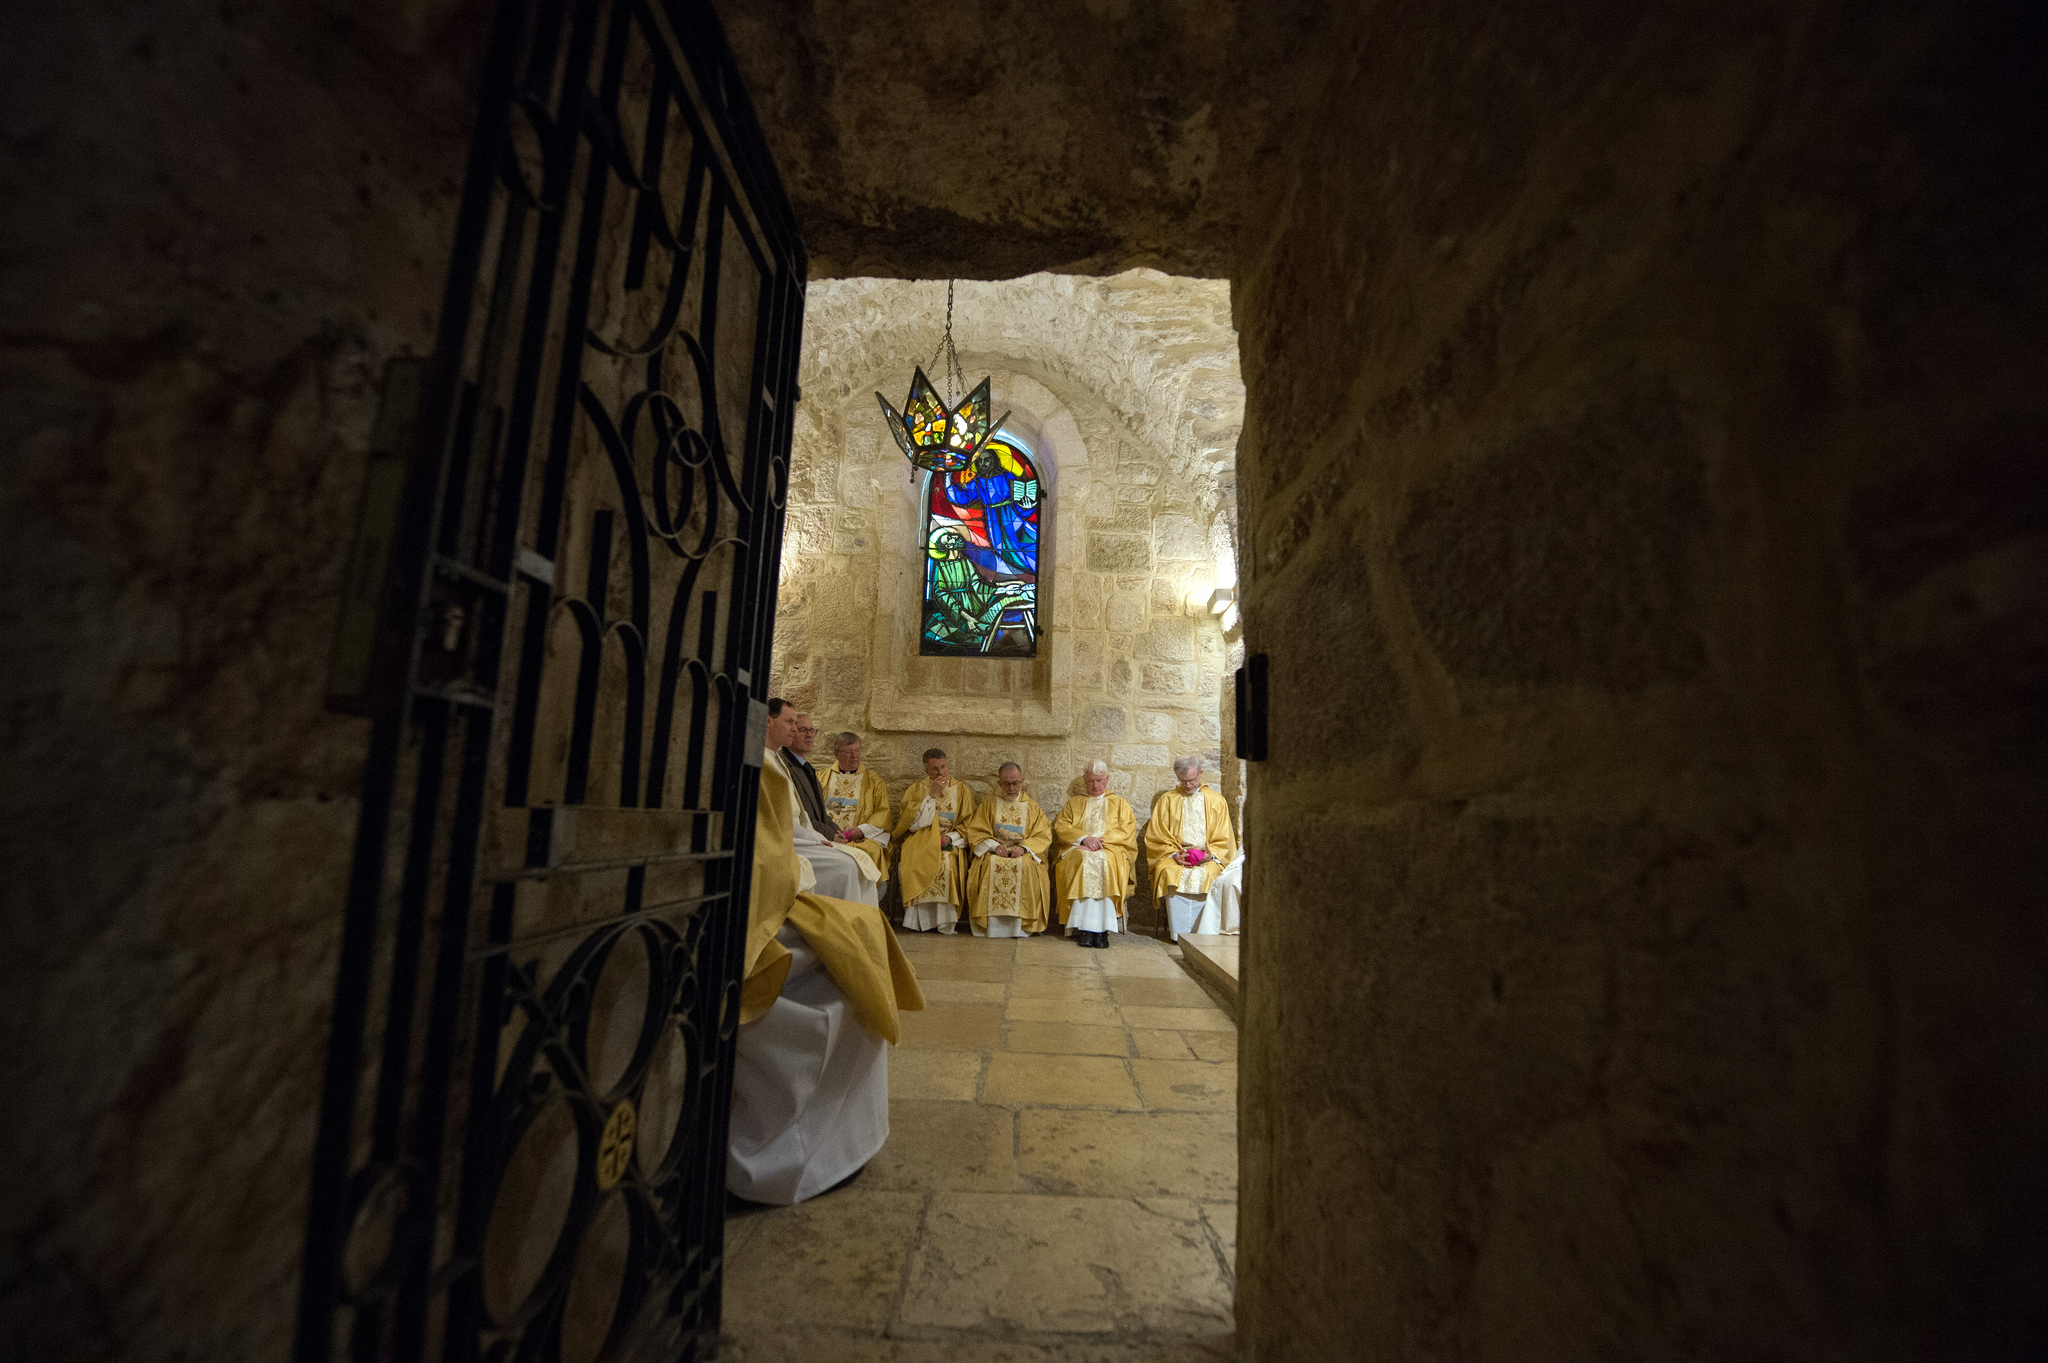 Visiting bishops see 'incomprehensible complexity' of Holy Land situation